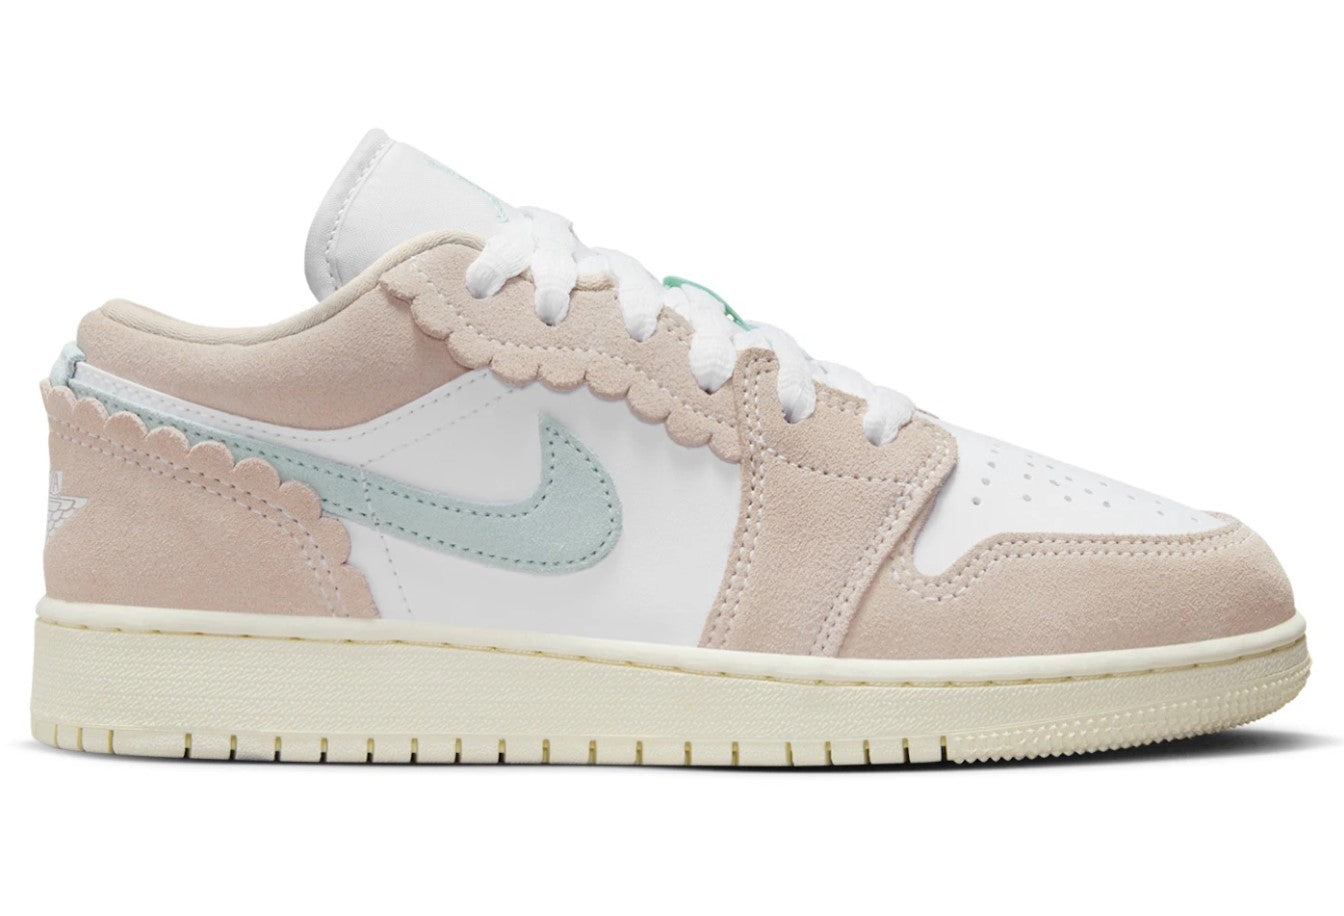 Air Jordan 1 Low "Scalloped Edge Guava Ice" - THE GAME